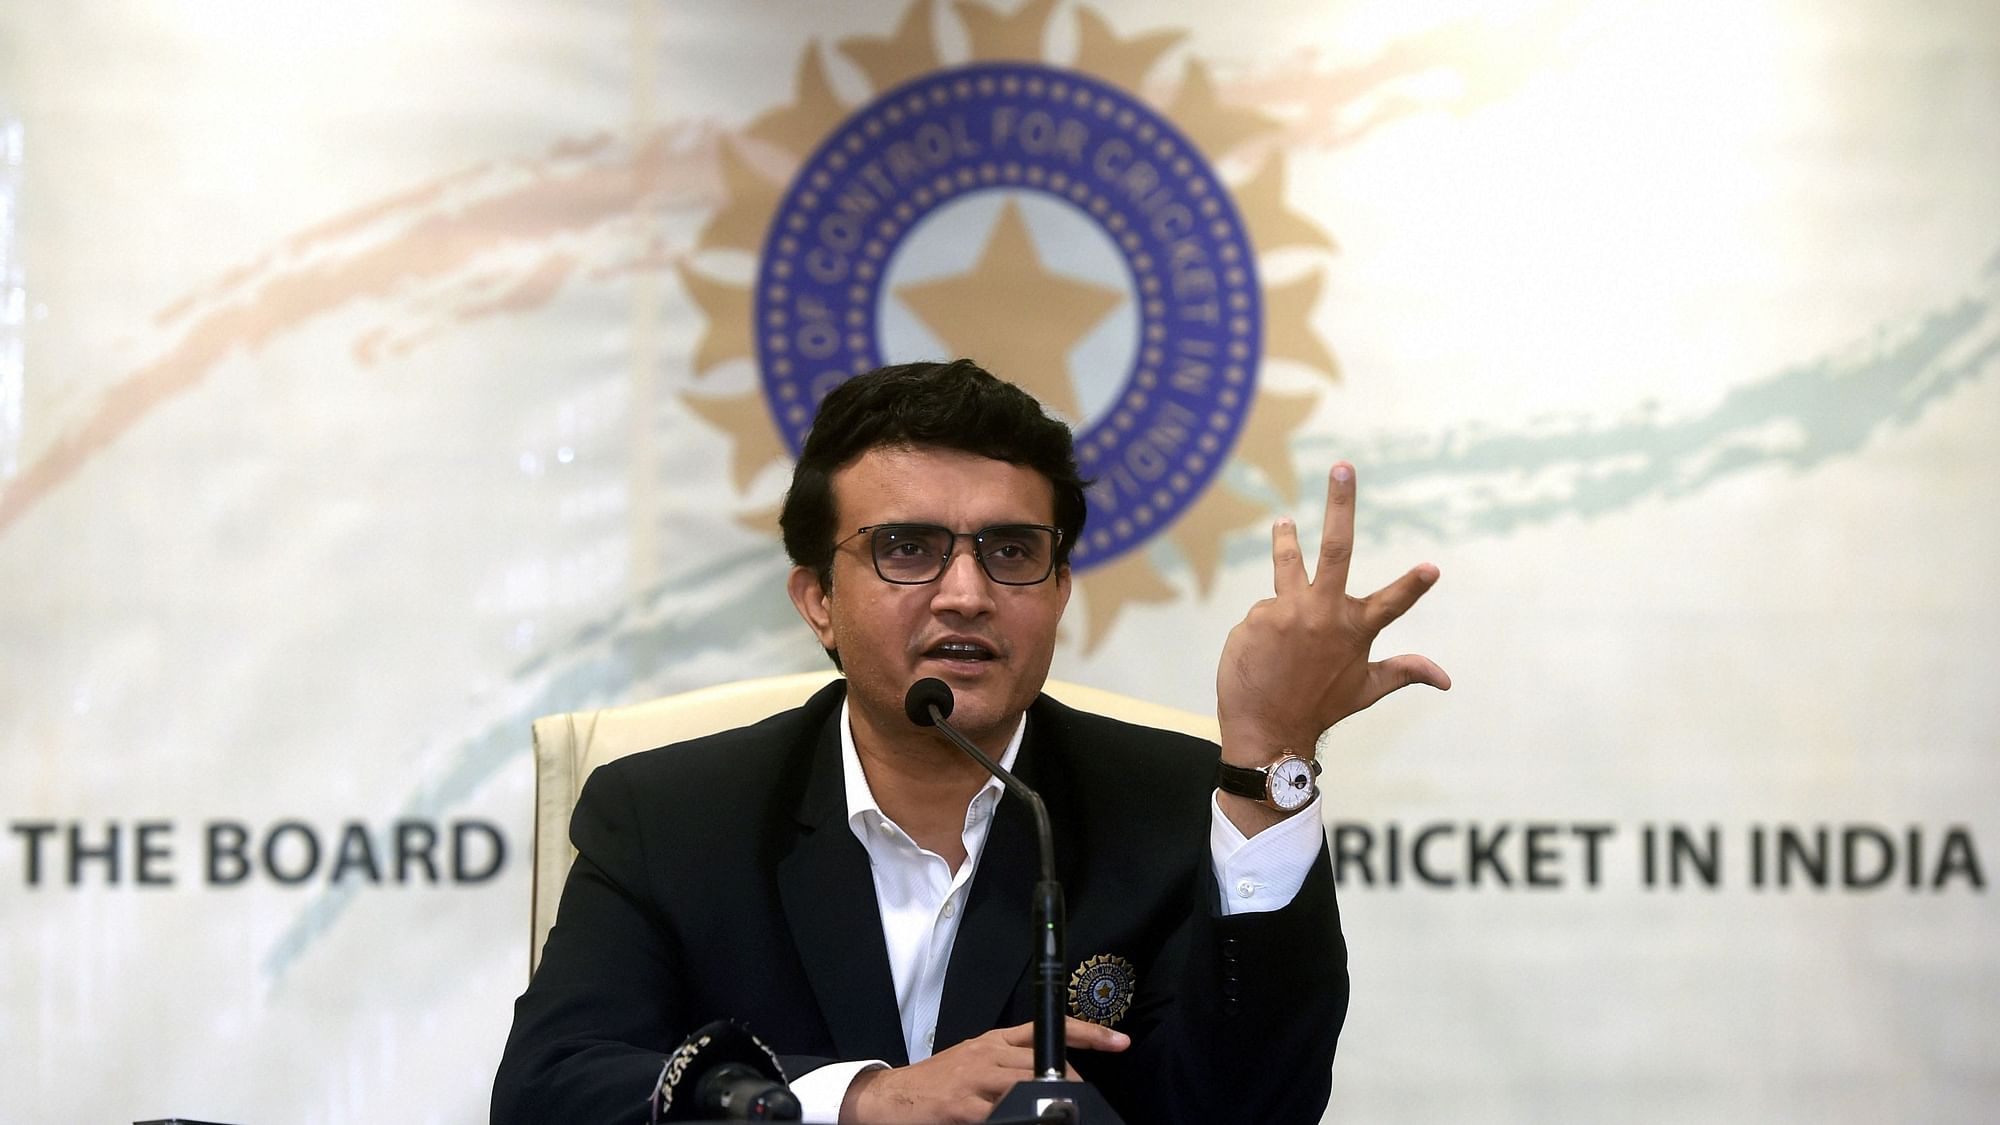 Newly-elected BCCI president Sourav Ganguly on Wednesday expressed optimism that Bangladesh’s tour of India will go ahead.